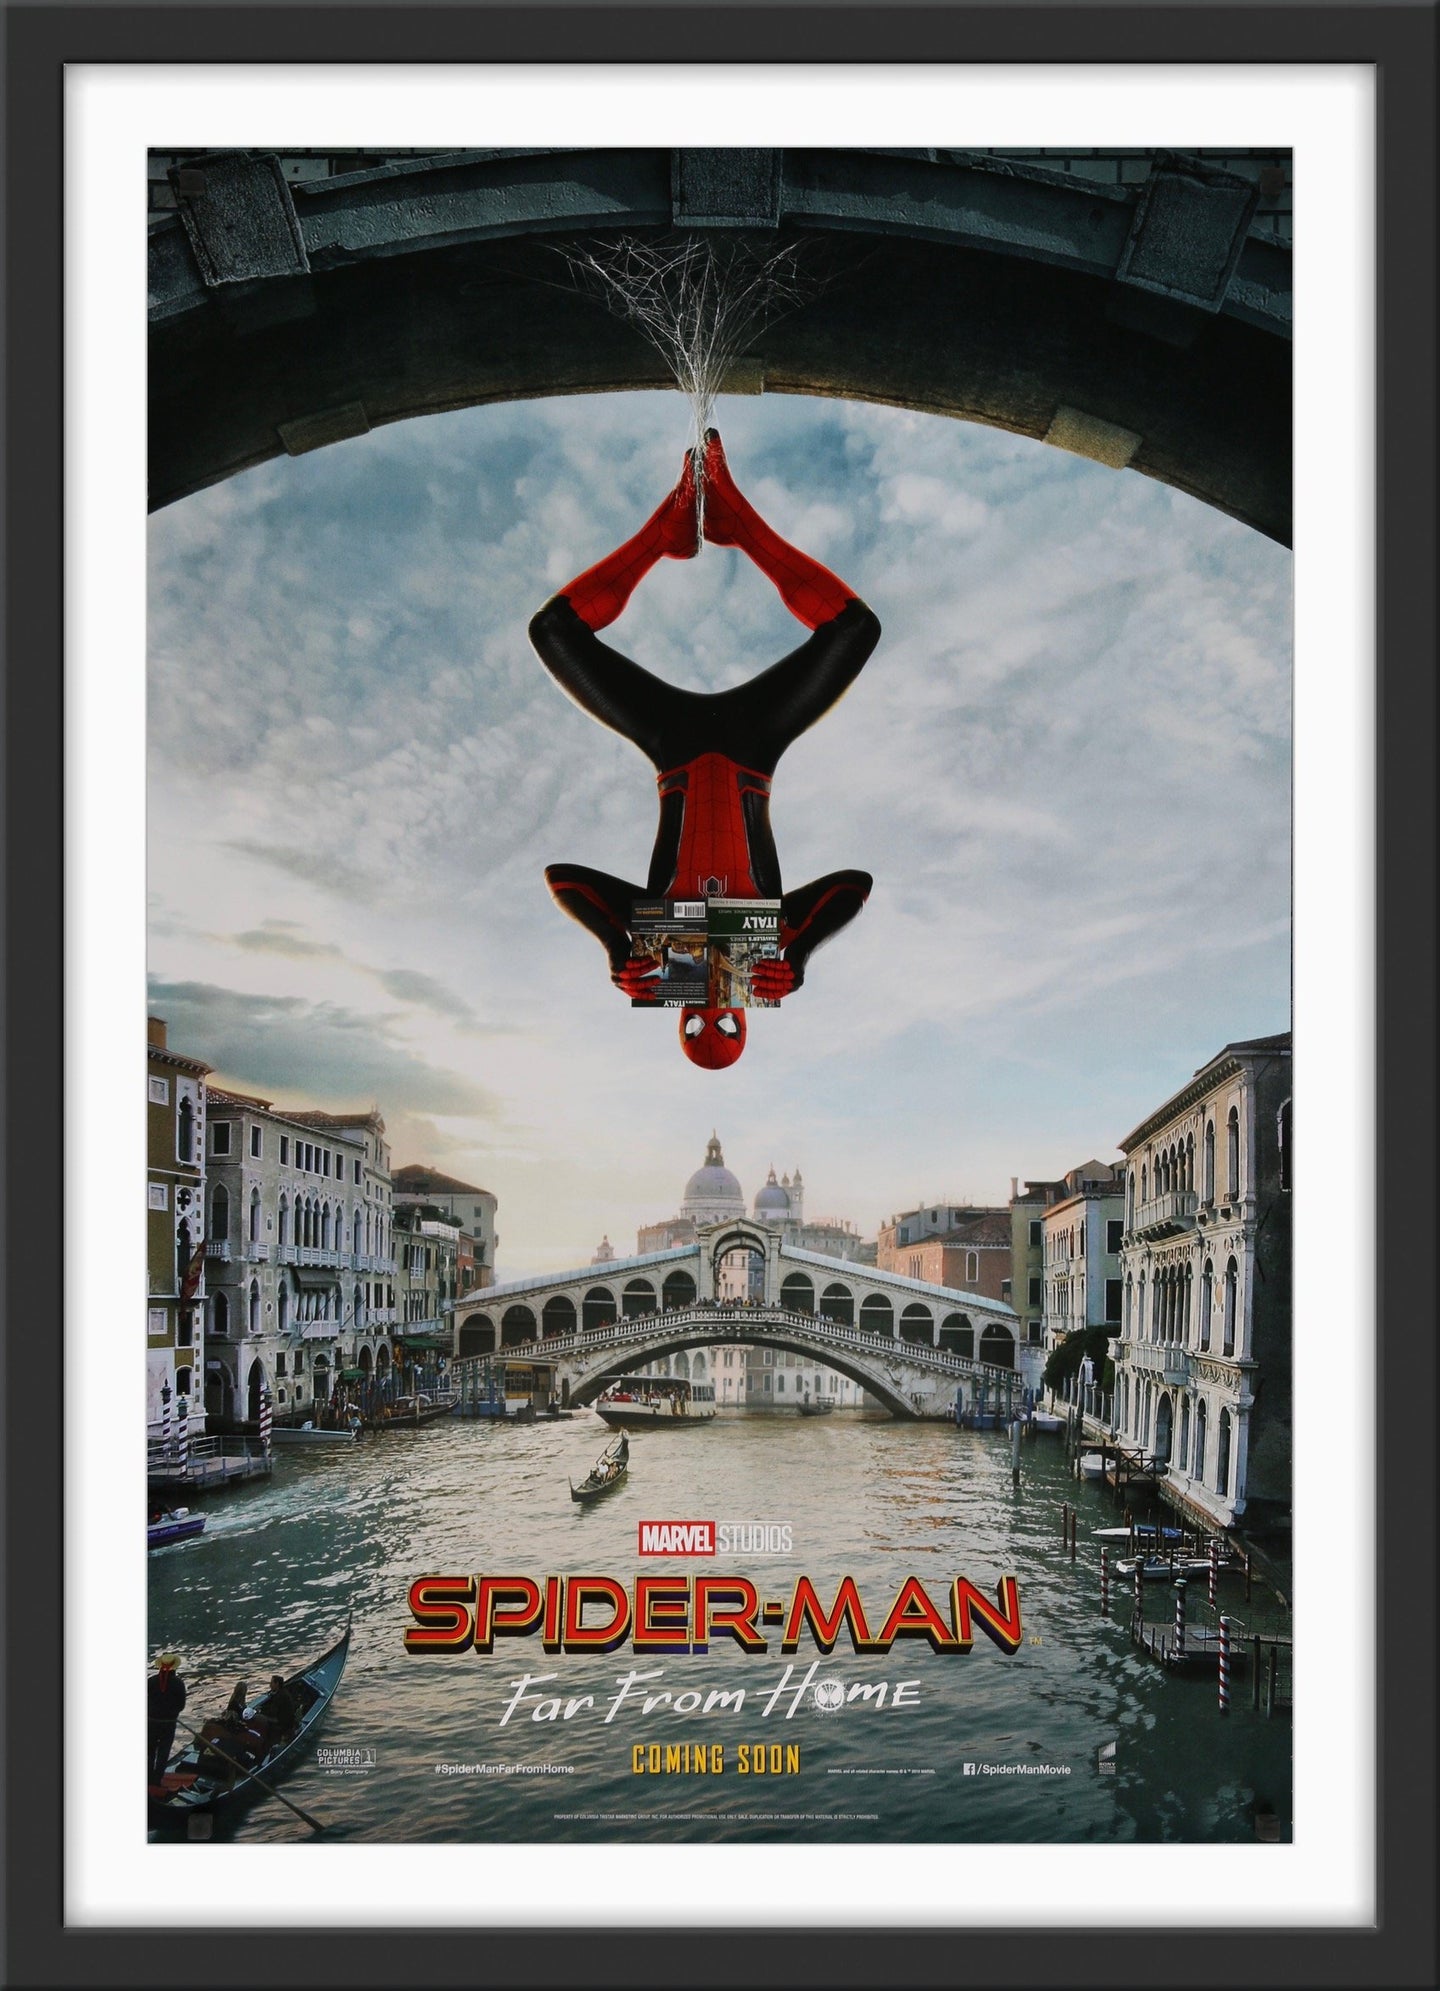 An original movie poster for the Marvel film Spider-Man Far From Home